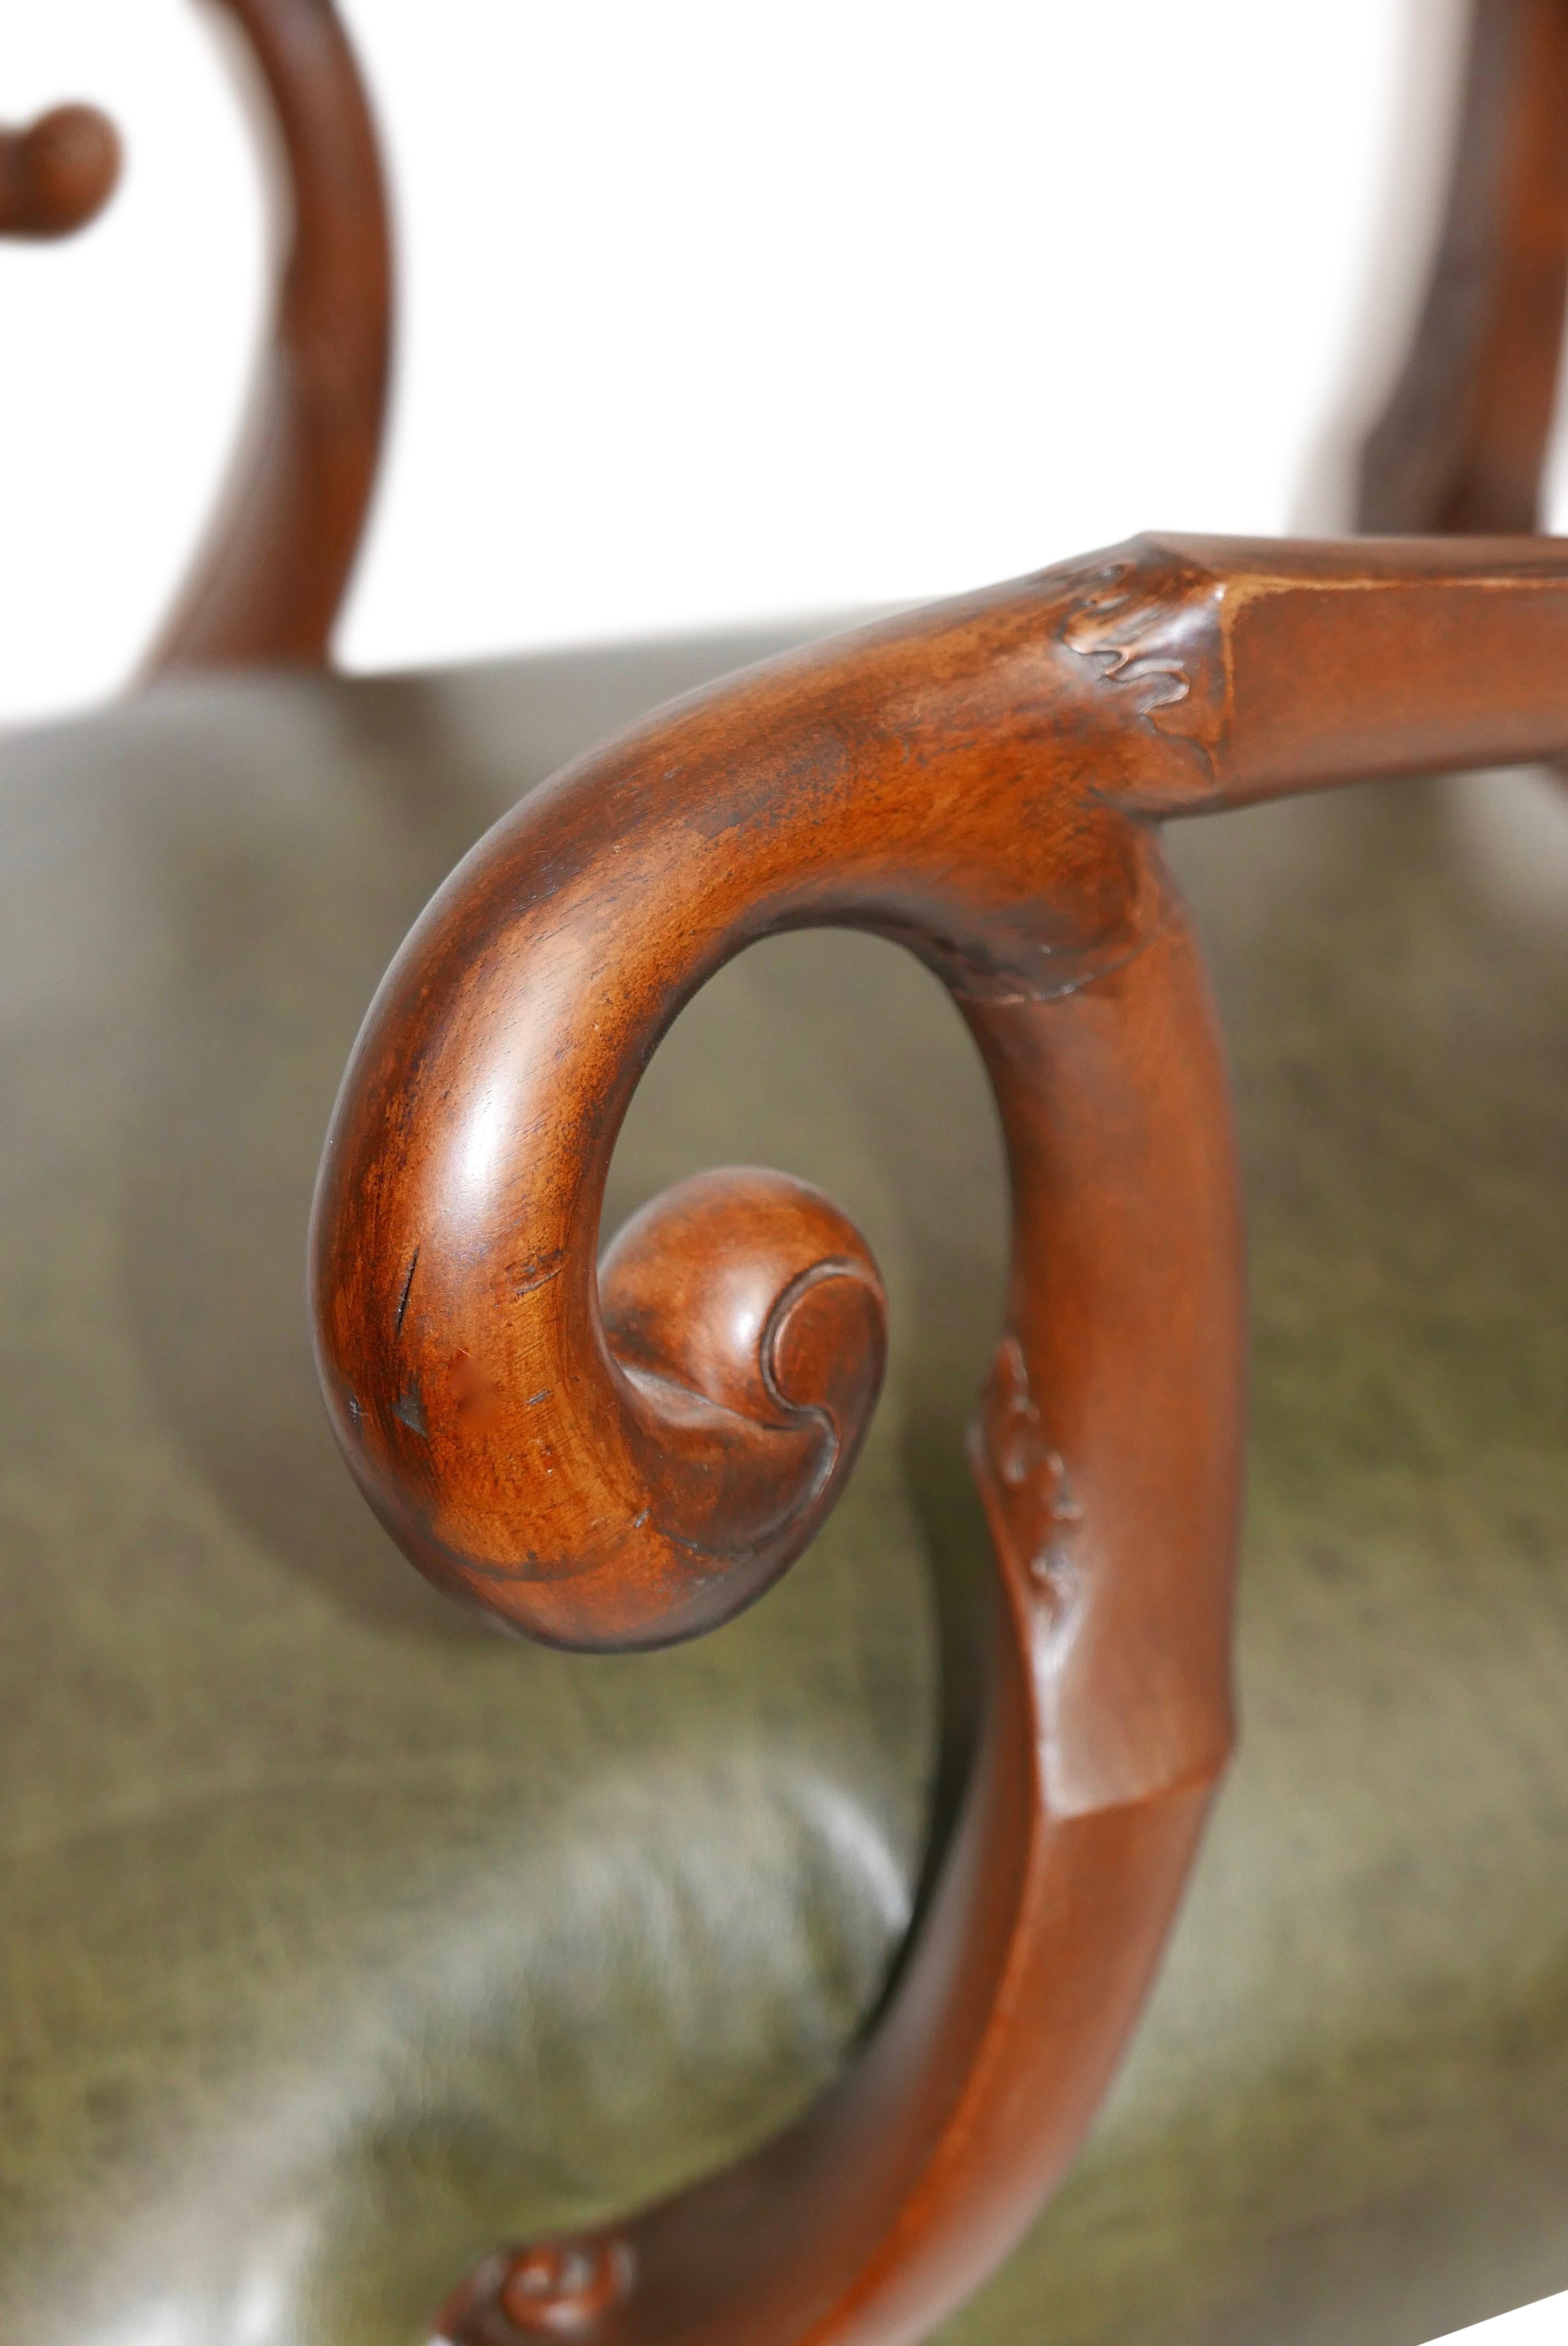 Walnut and Leather Armchair Desk Chair after Giles Grendey, Late 19th Century For Sale 4